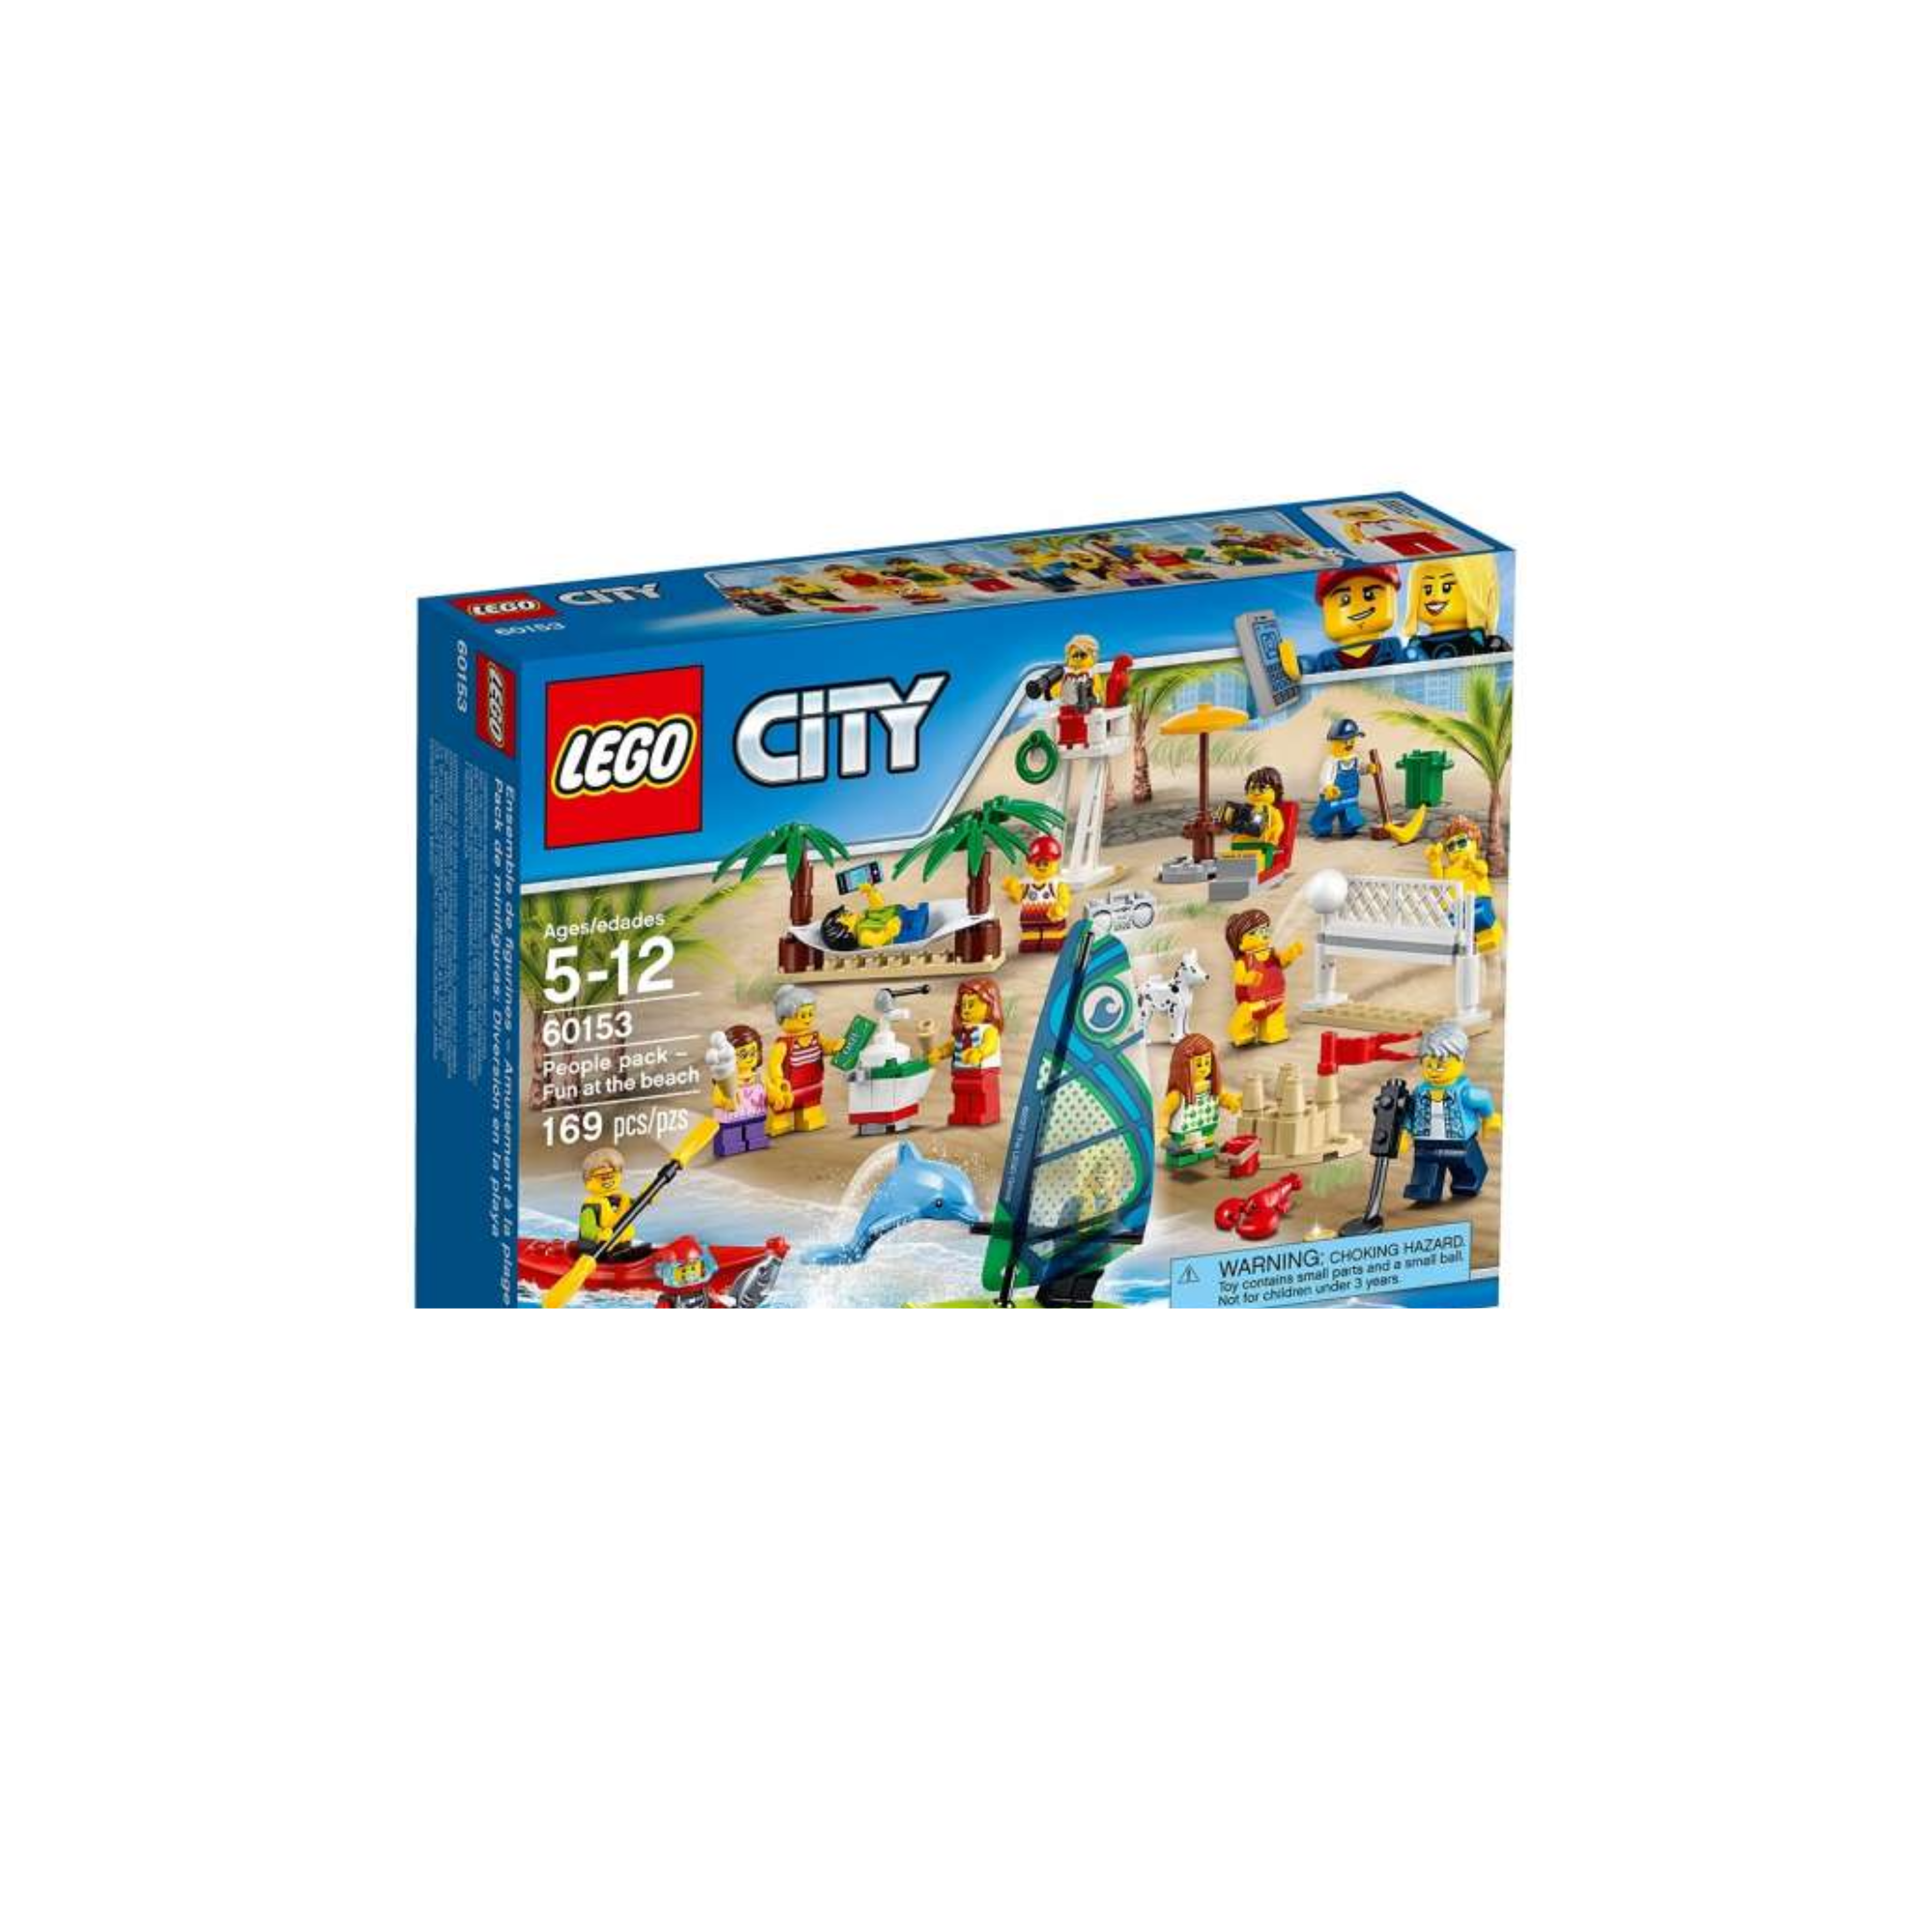 Lego City People pack Fun at the beach